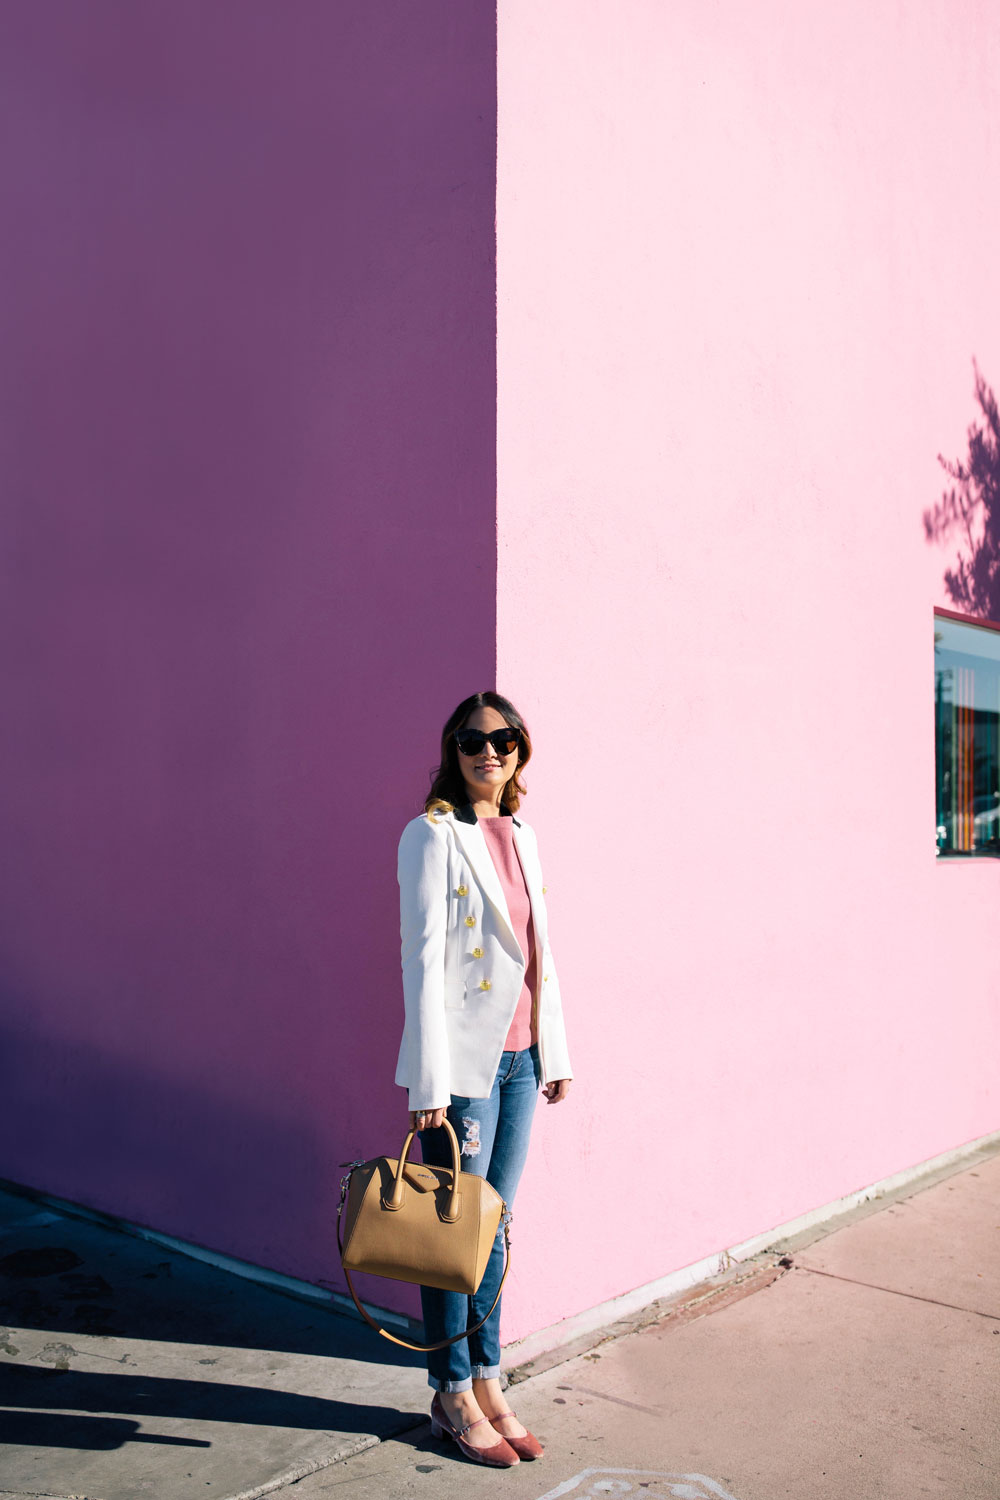 Paul Smith Pink Wall Los Angeles